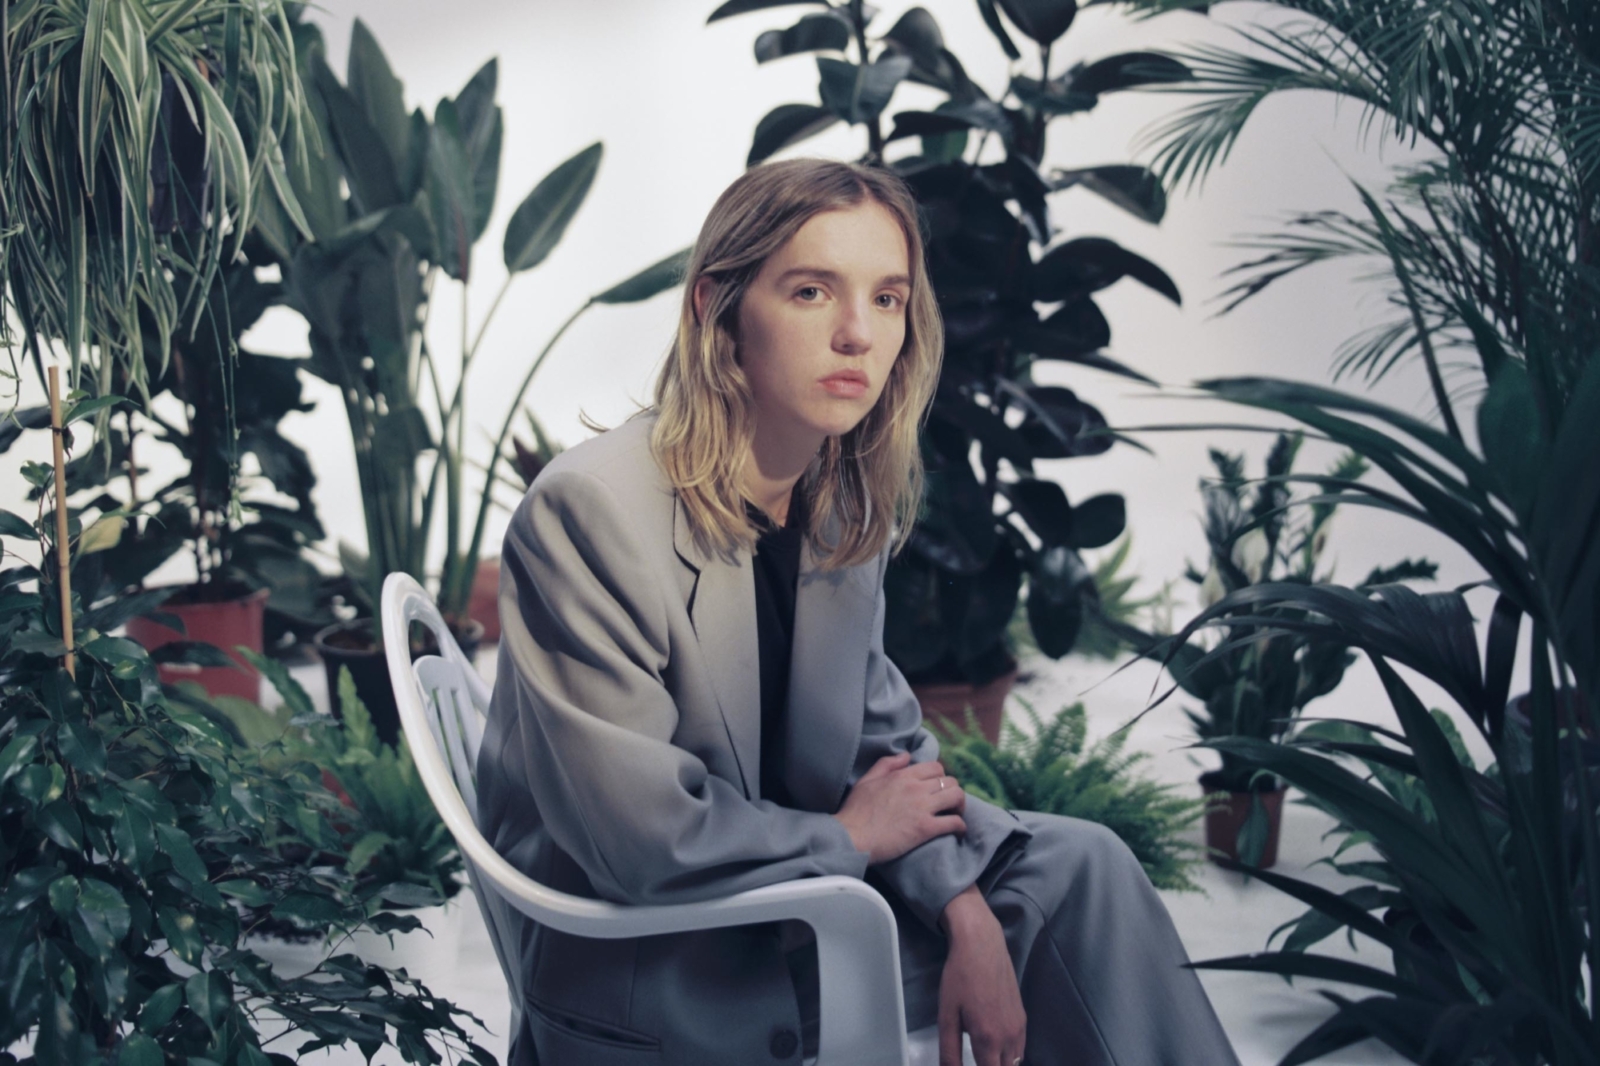 The Japanese House unveils dreamy new track 'Chewing Cotton Wool'